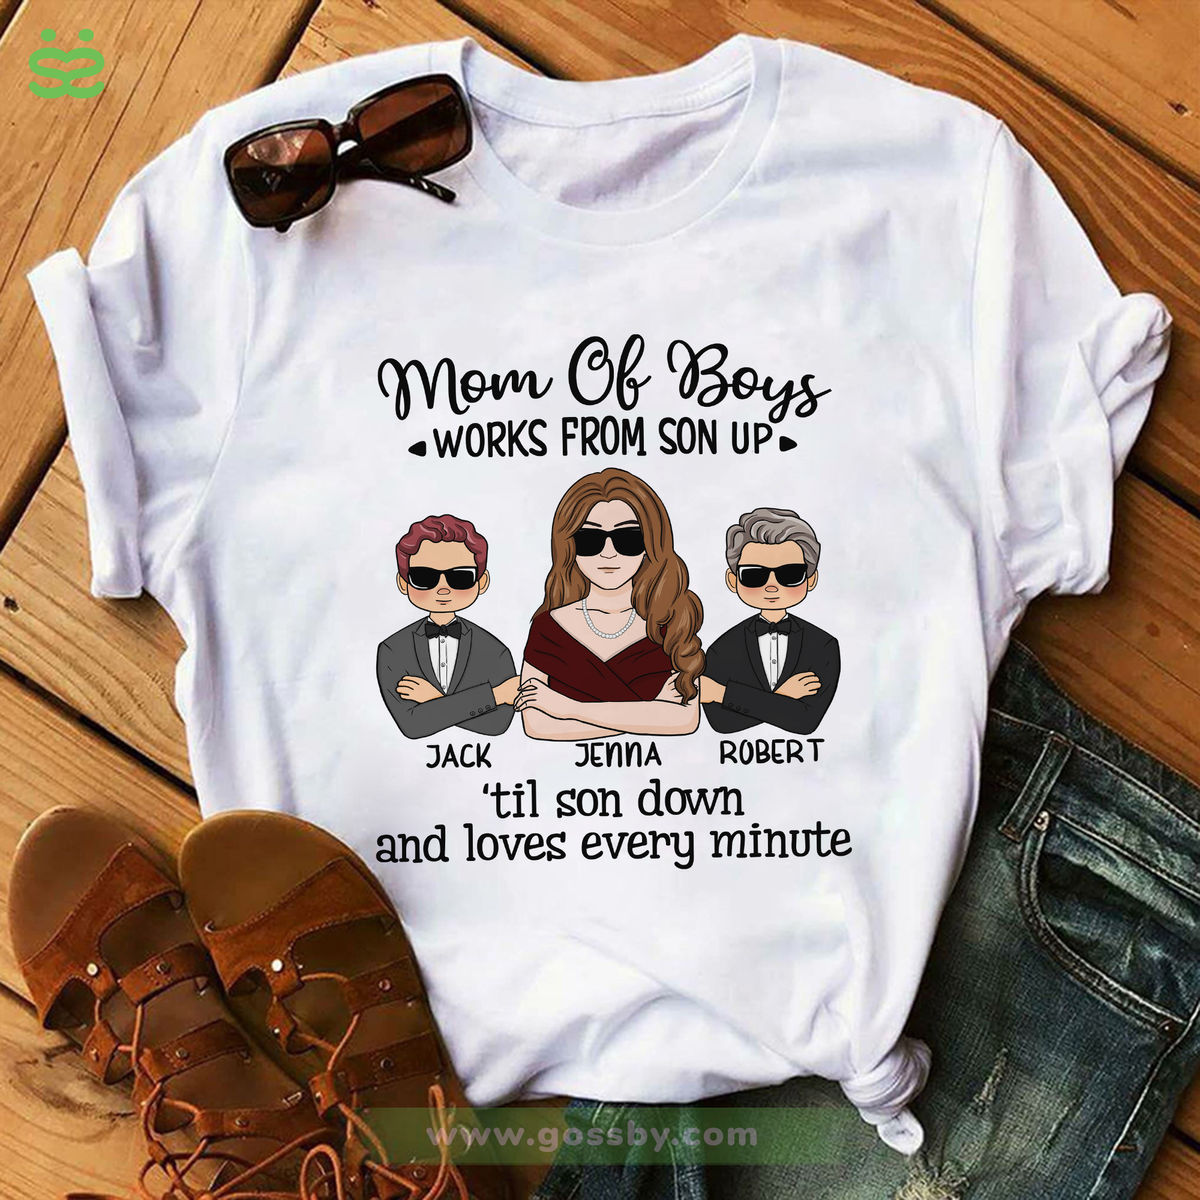 Personalized Shirt - Family - Mom & Son - Mom of boys Works from son up 'til son down and loves every minute - Mother's Day Gifts, Gifts For Mother_2